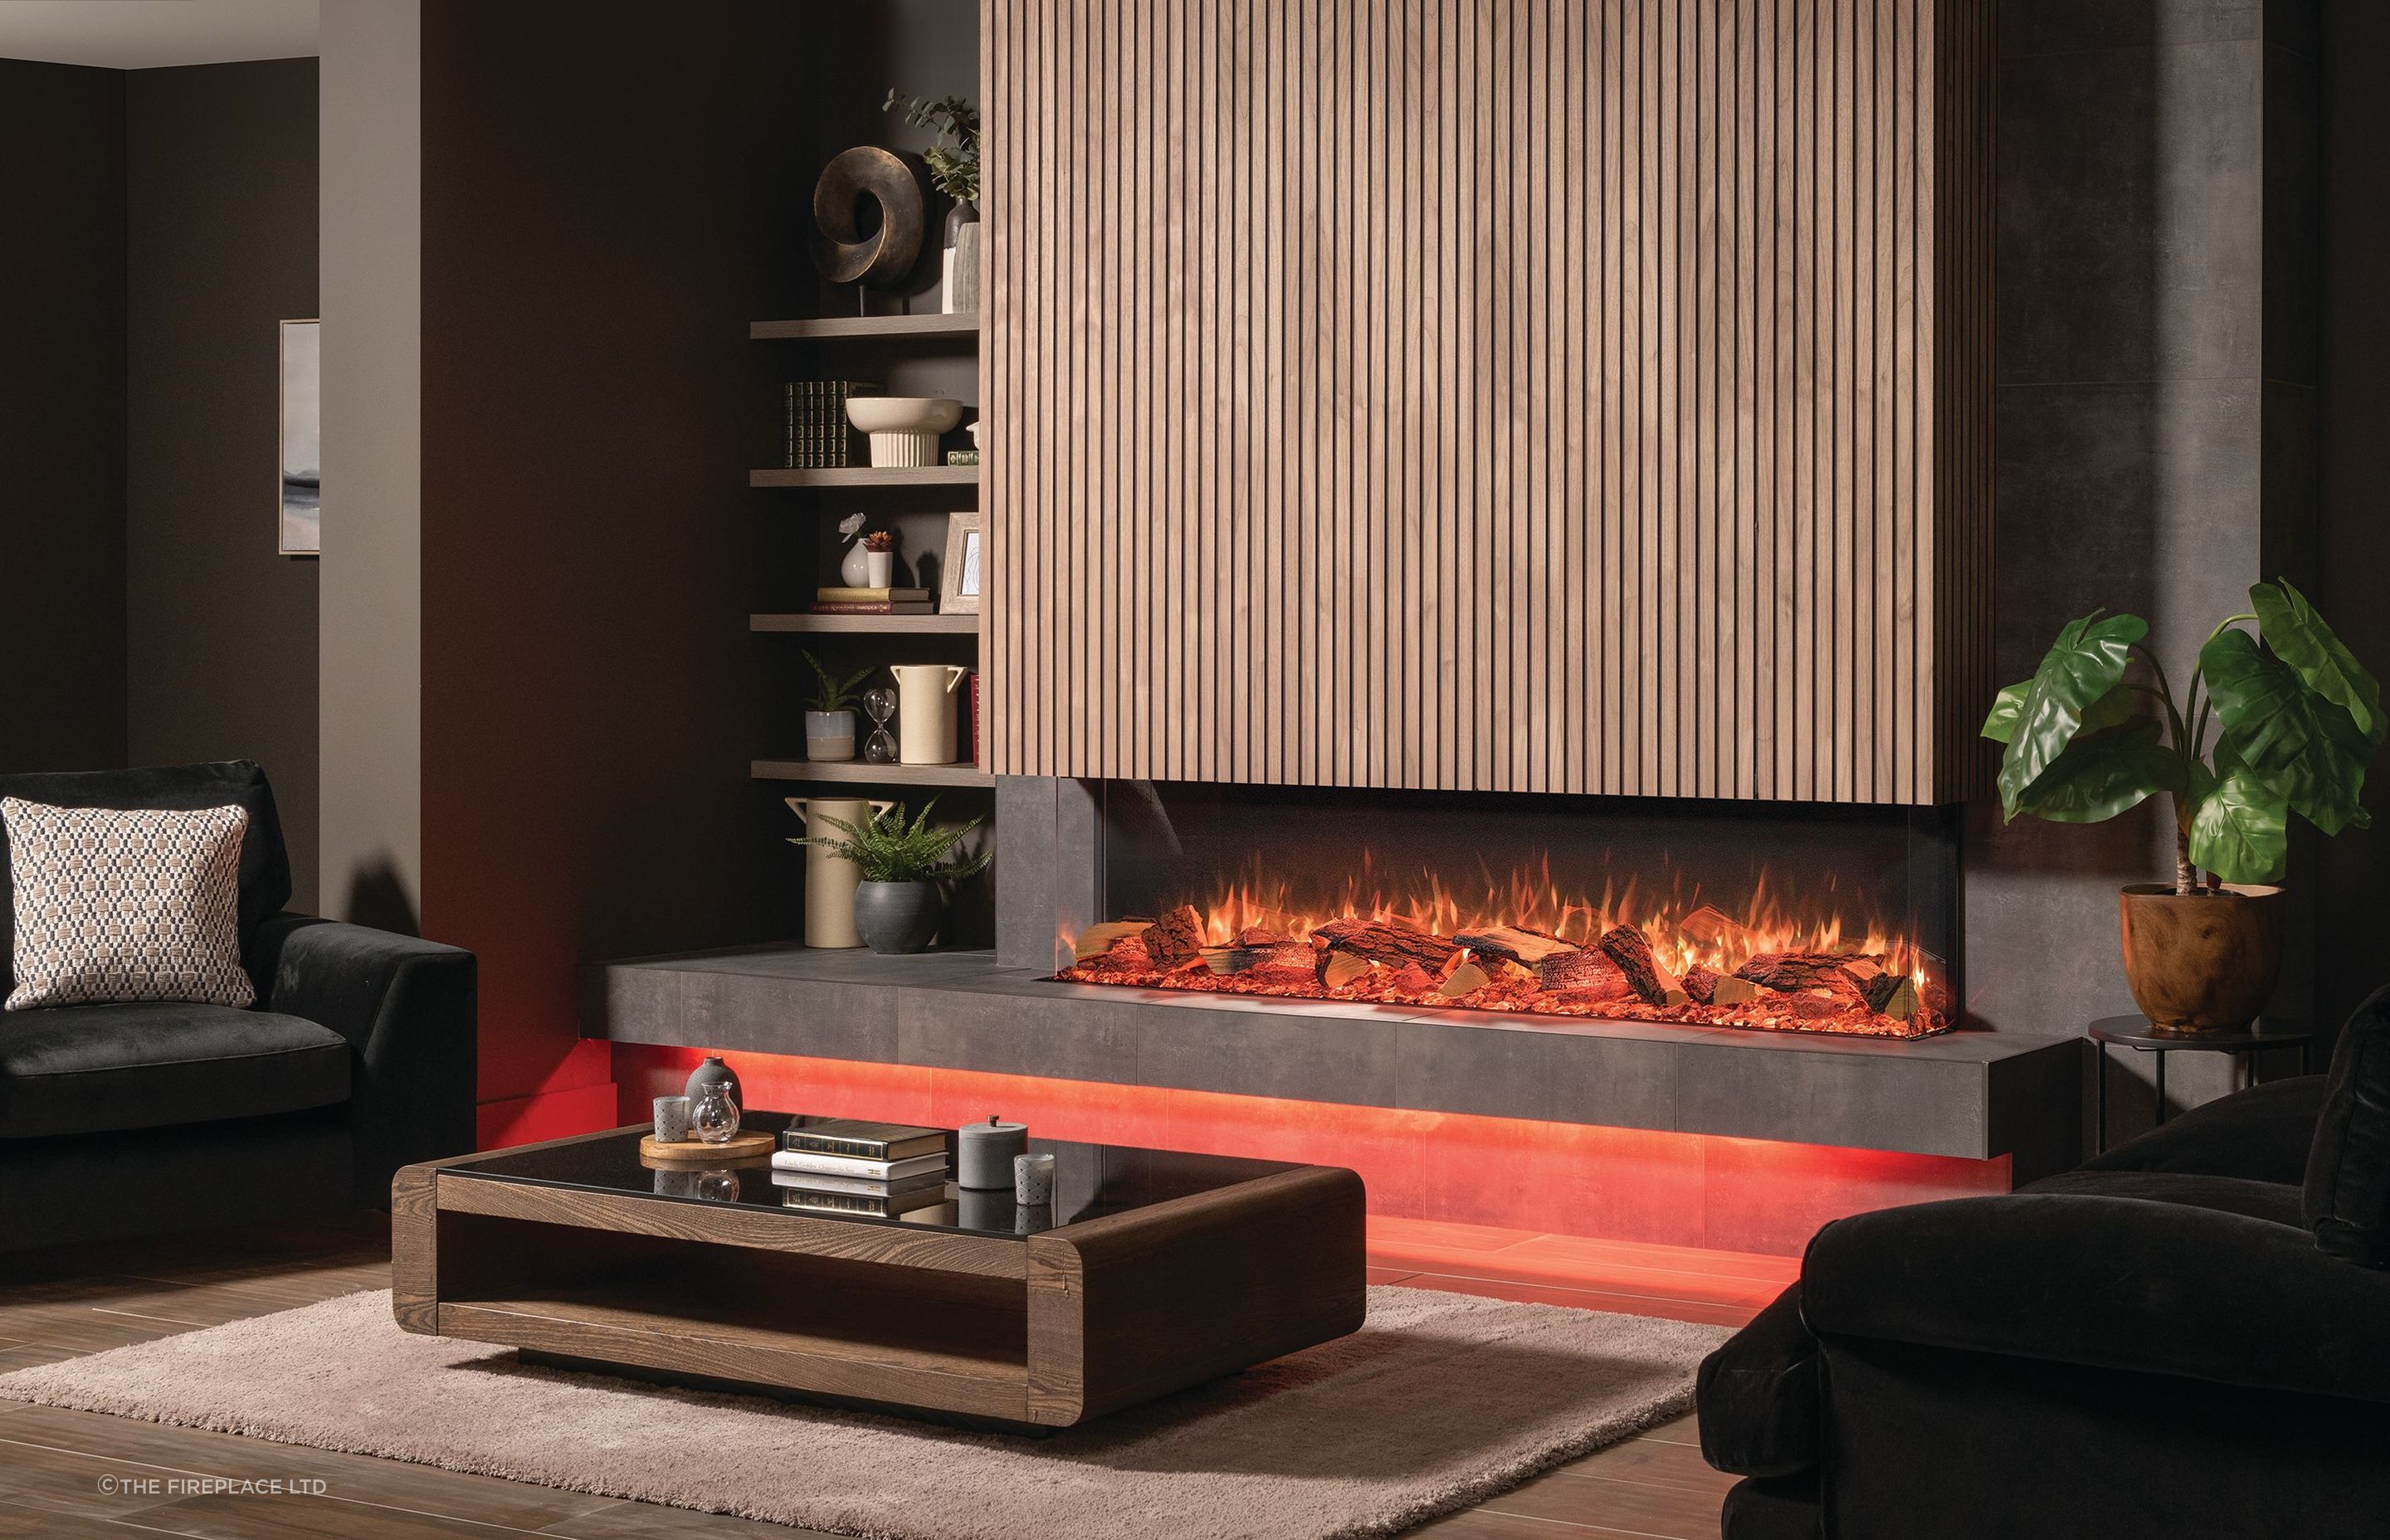 The Onyx Avanti Electric Fireplace Range almost has to be seen to be believed as a great showcase of technology and innovation